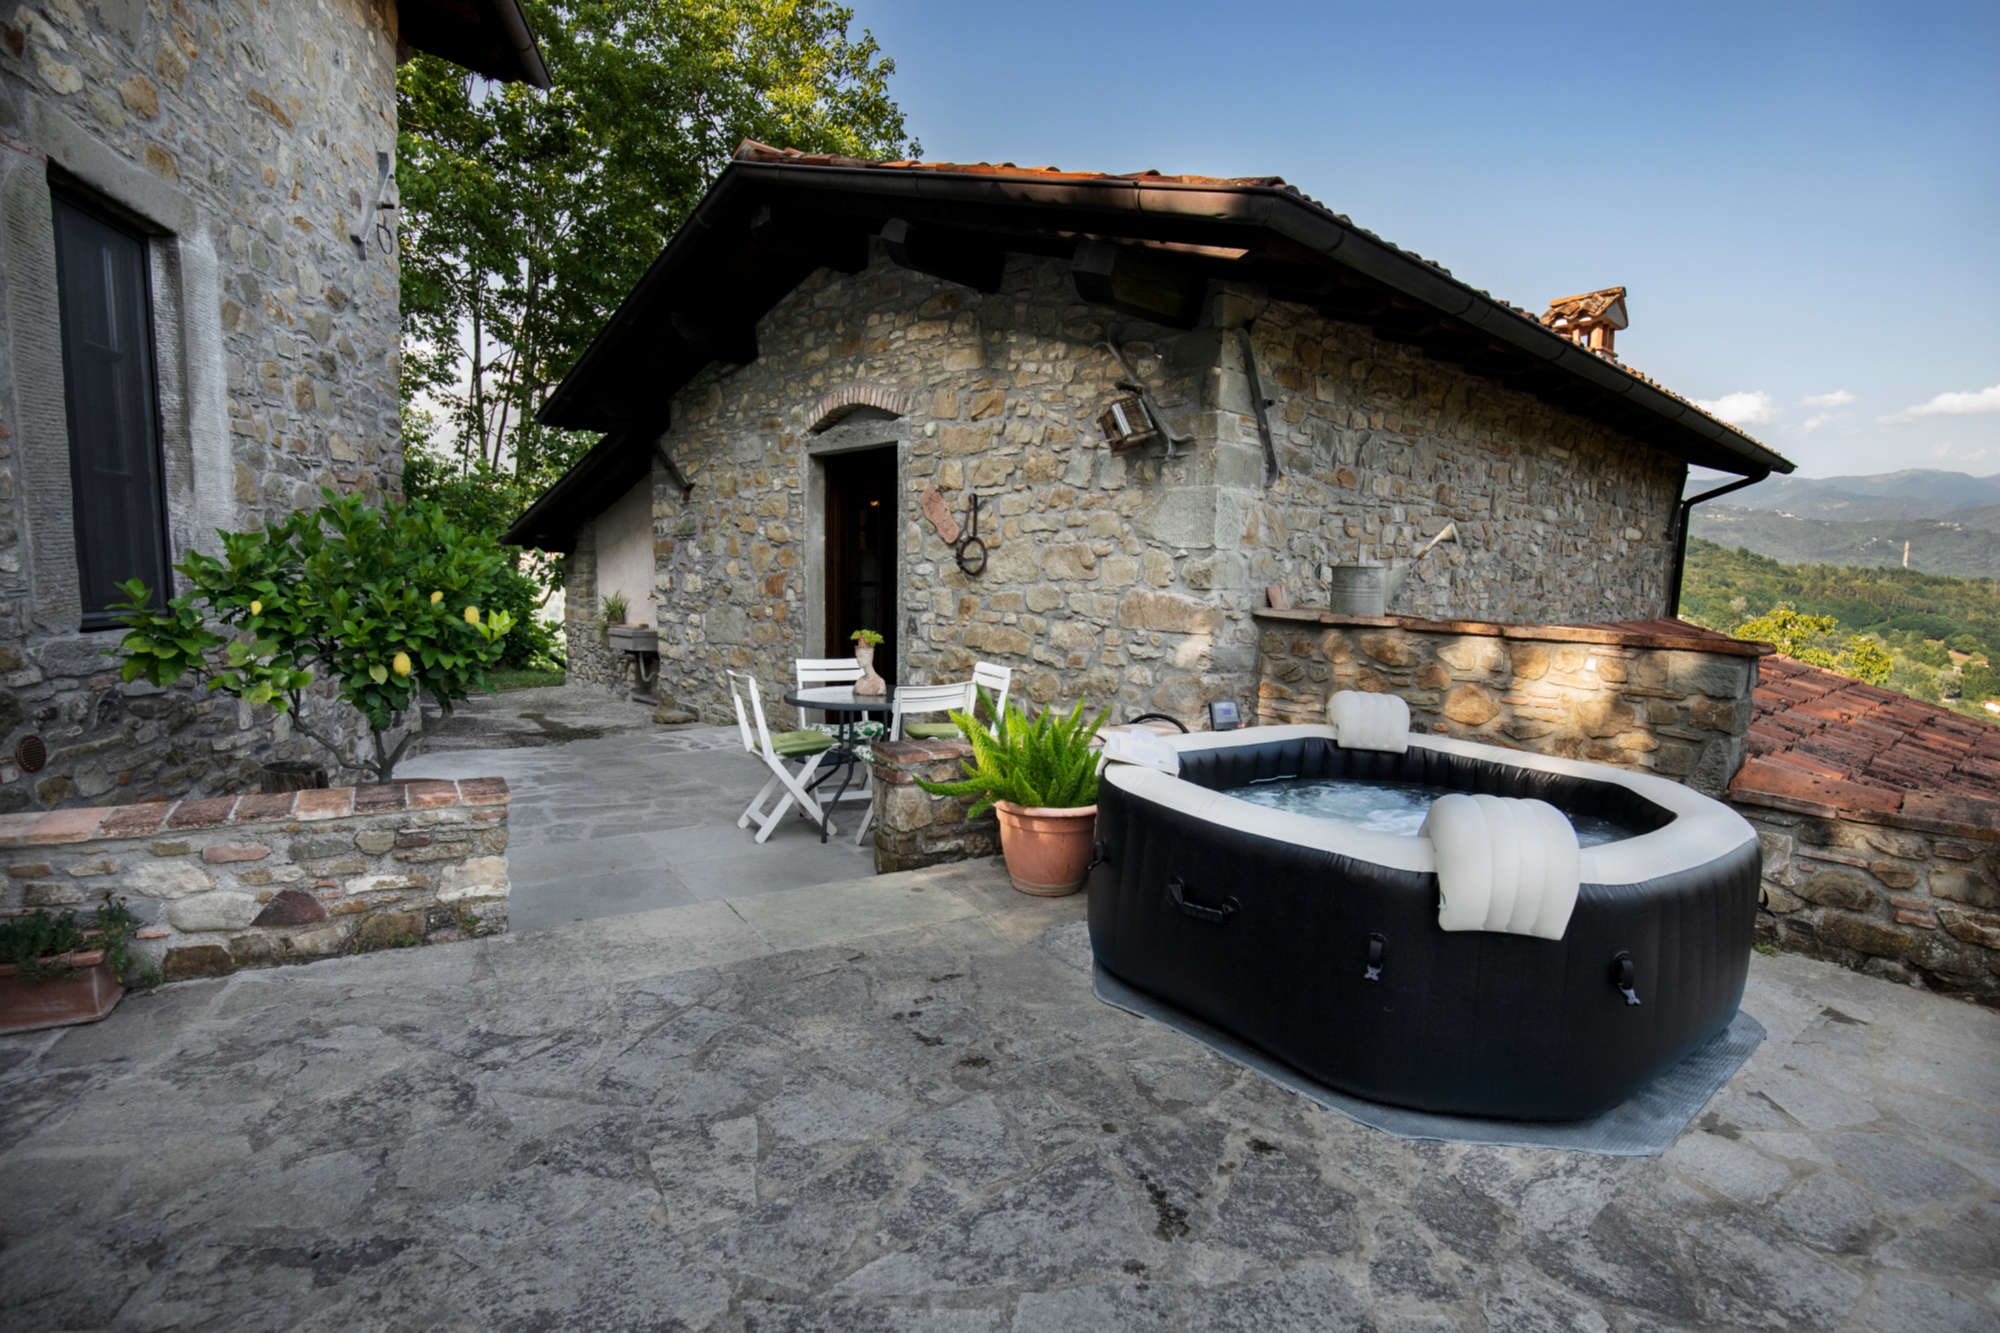 Stay for two people in Garfagnana, four nights for the price of three